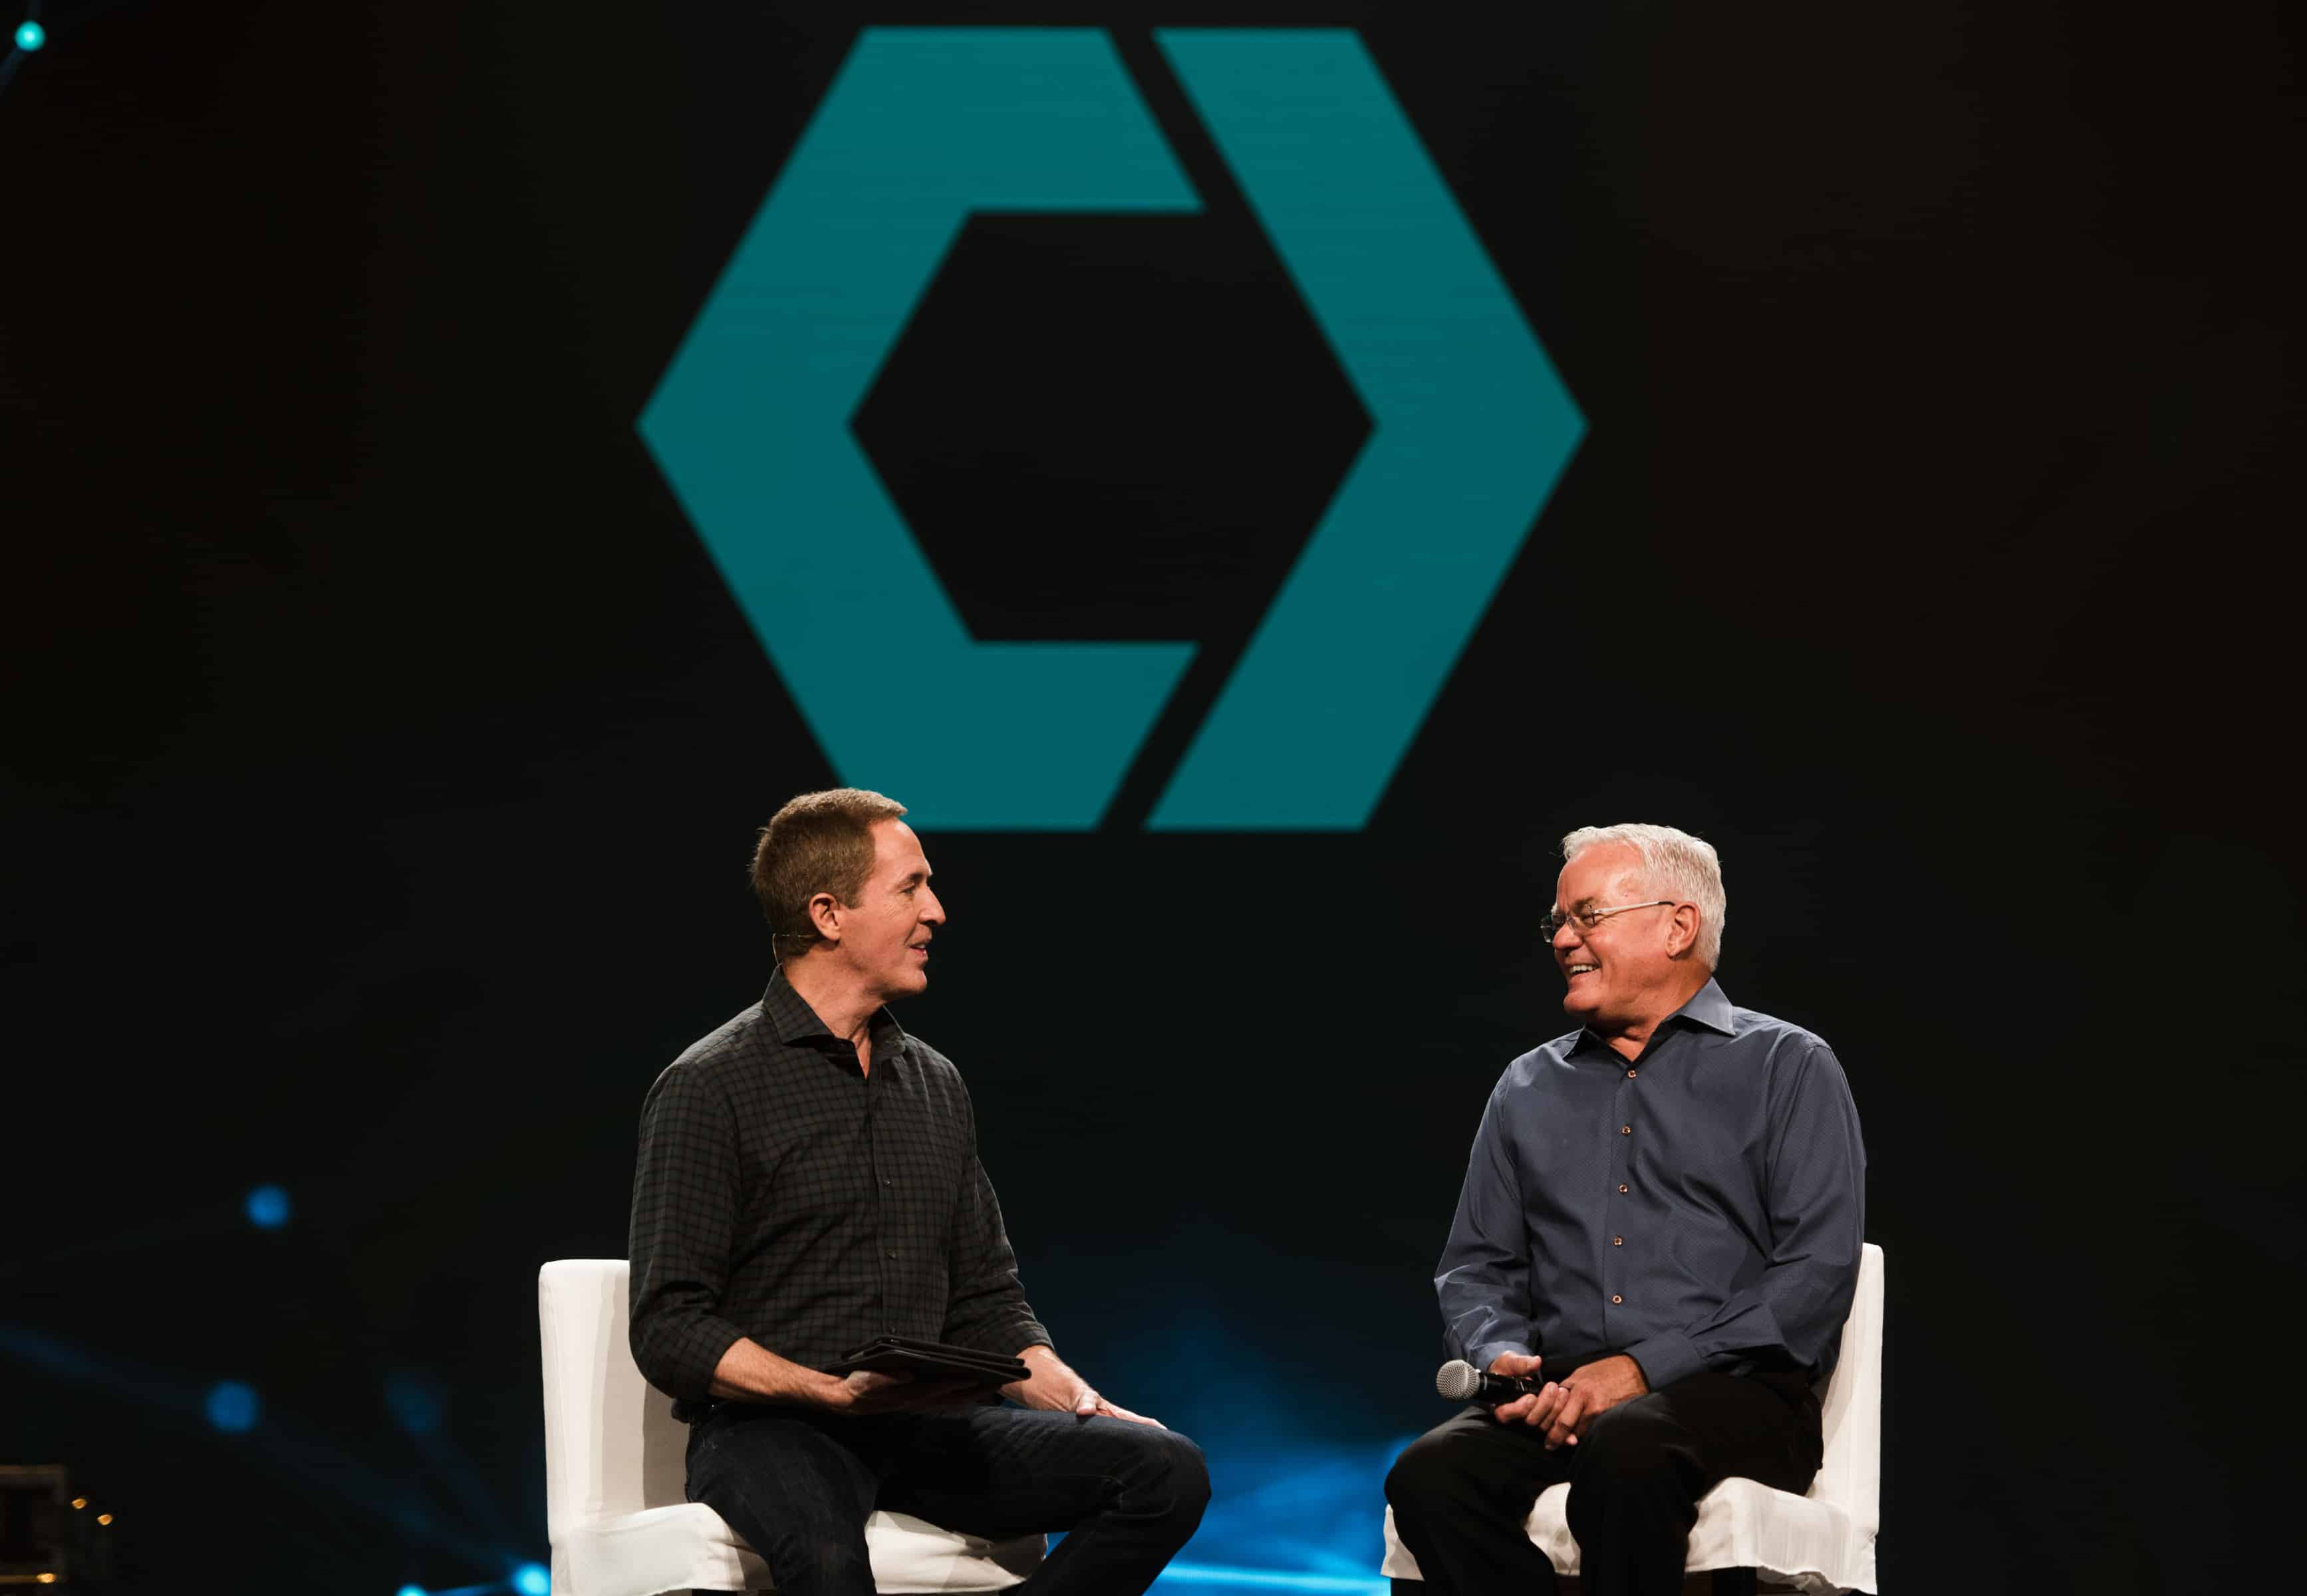 Leadership lessons from Andy Stanley and Bill Hybels